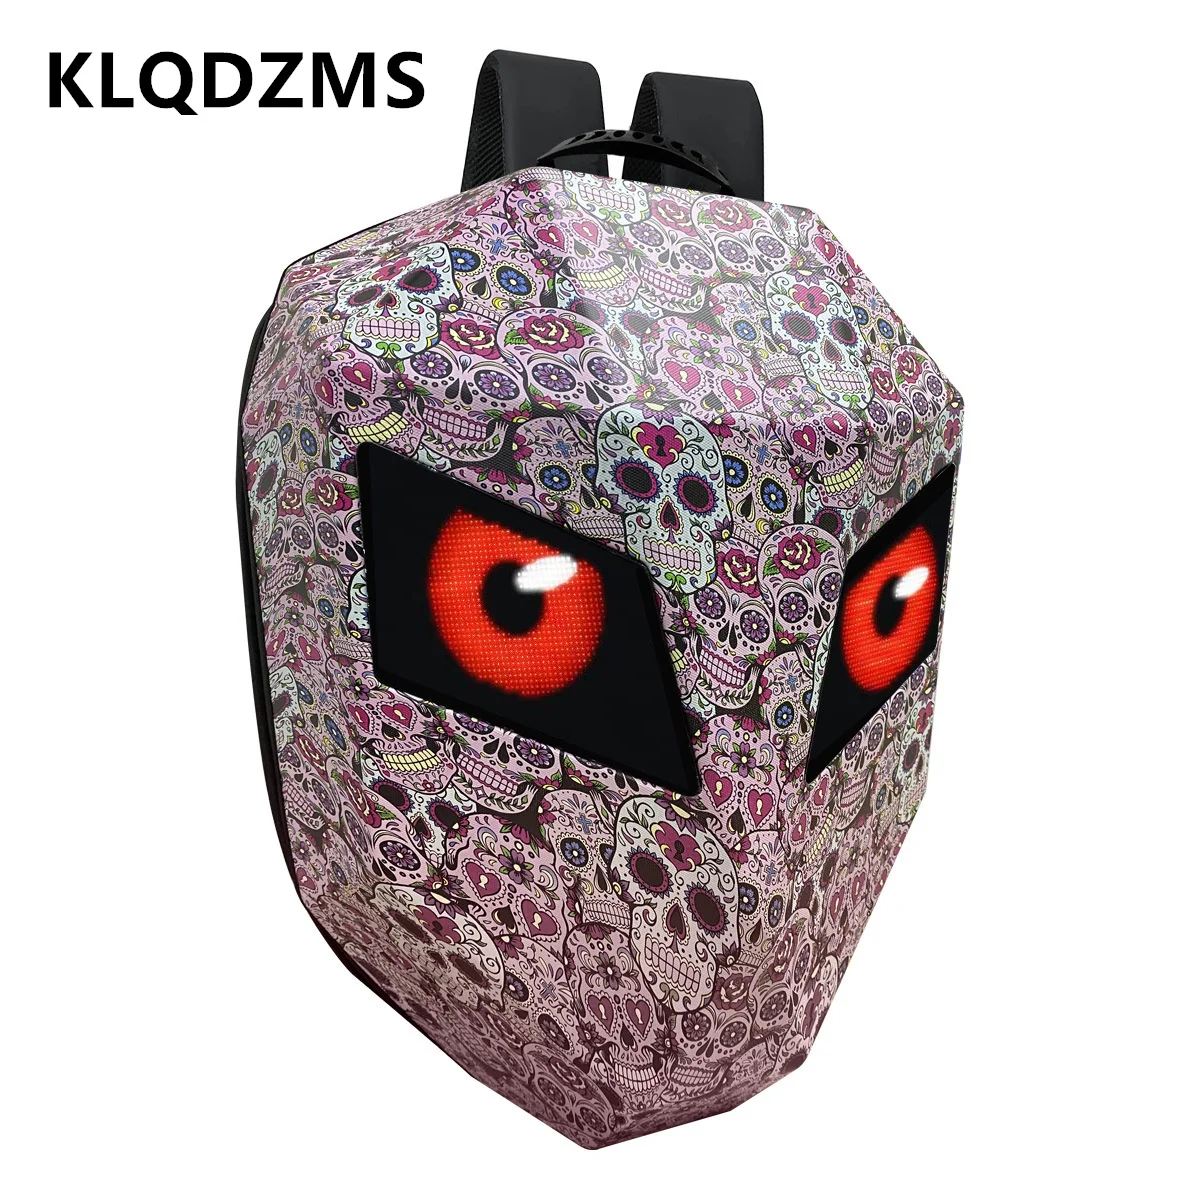 

KLQDZMS New Men's Backpack Motorcycle Riding Bag ABS Laptop Schoolbag Outdoor Sports Hard Shell Waterproof Riding Shoulder Bag